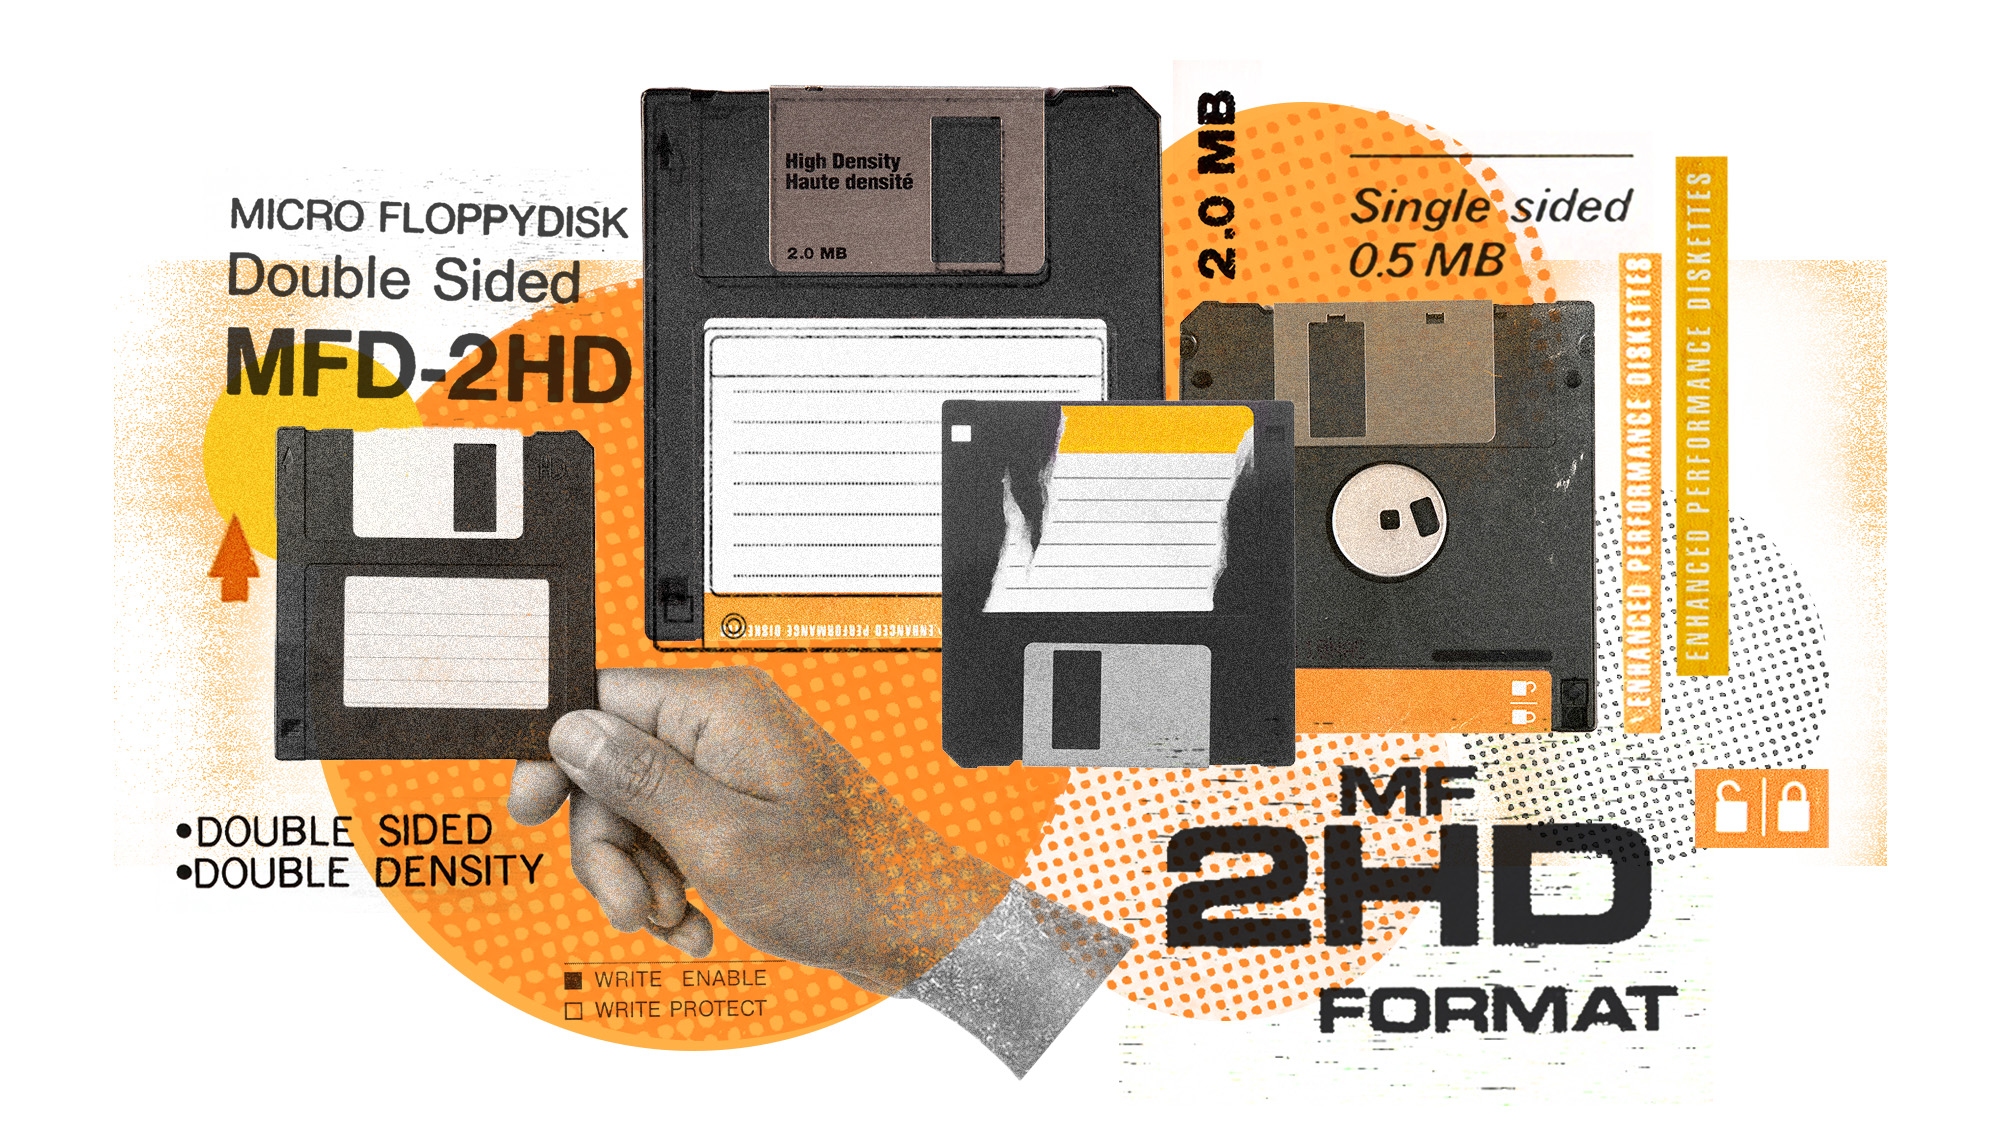  The unlikely staying power of the humble floppy disk 